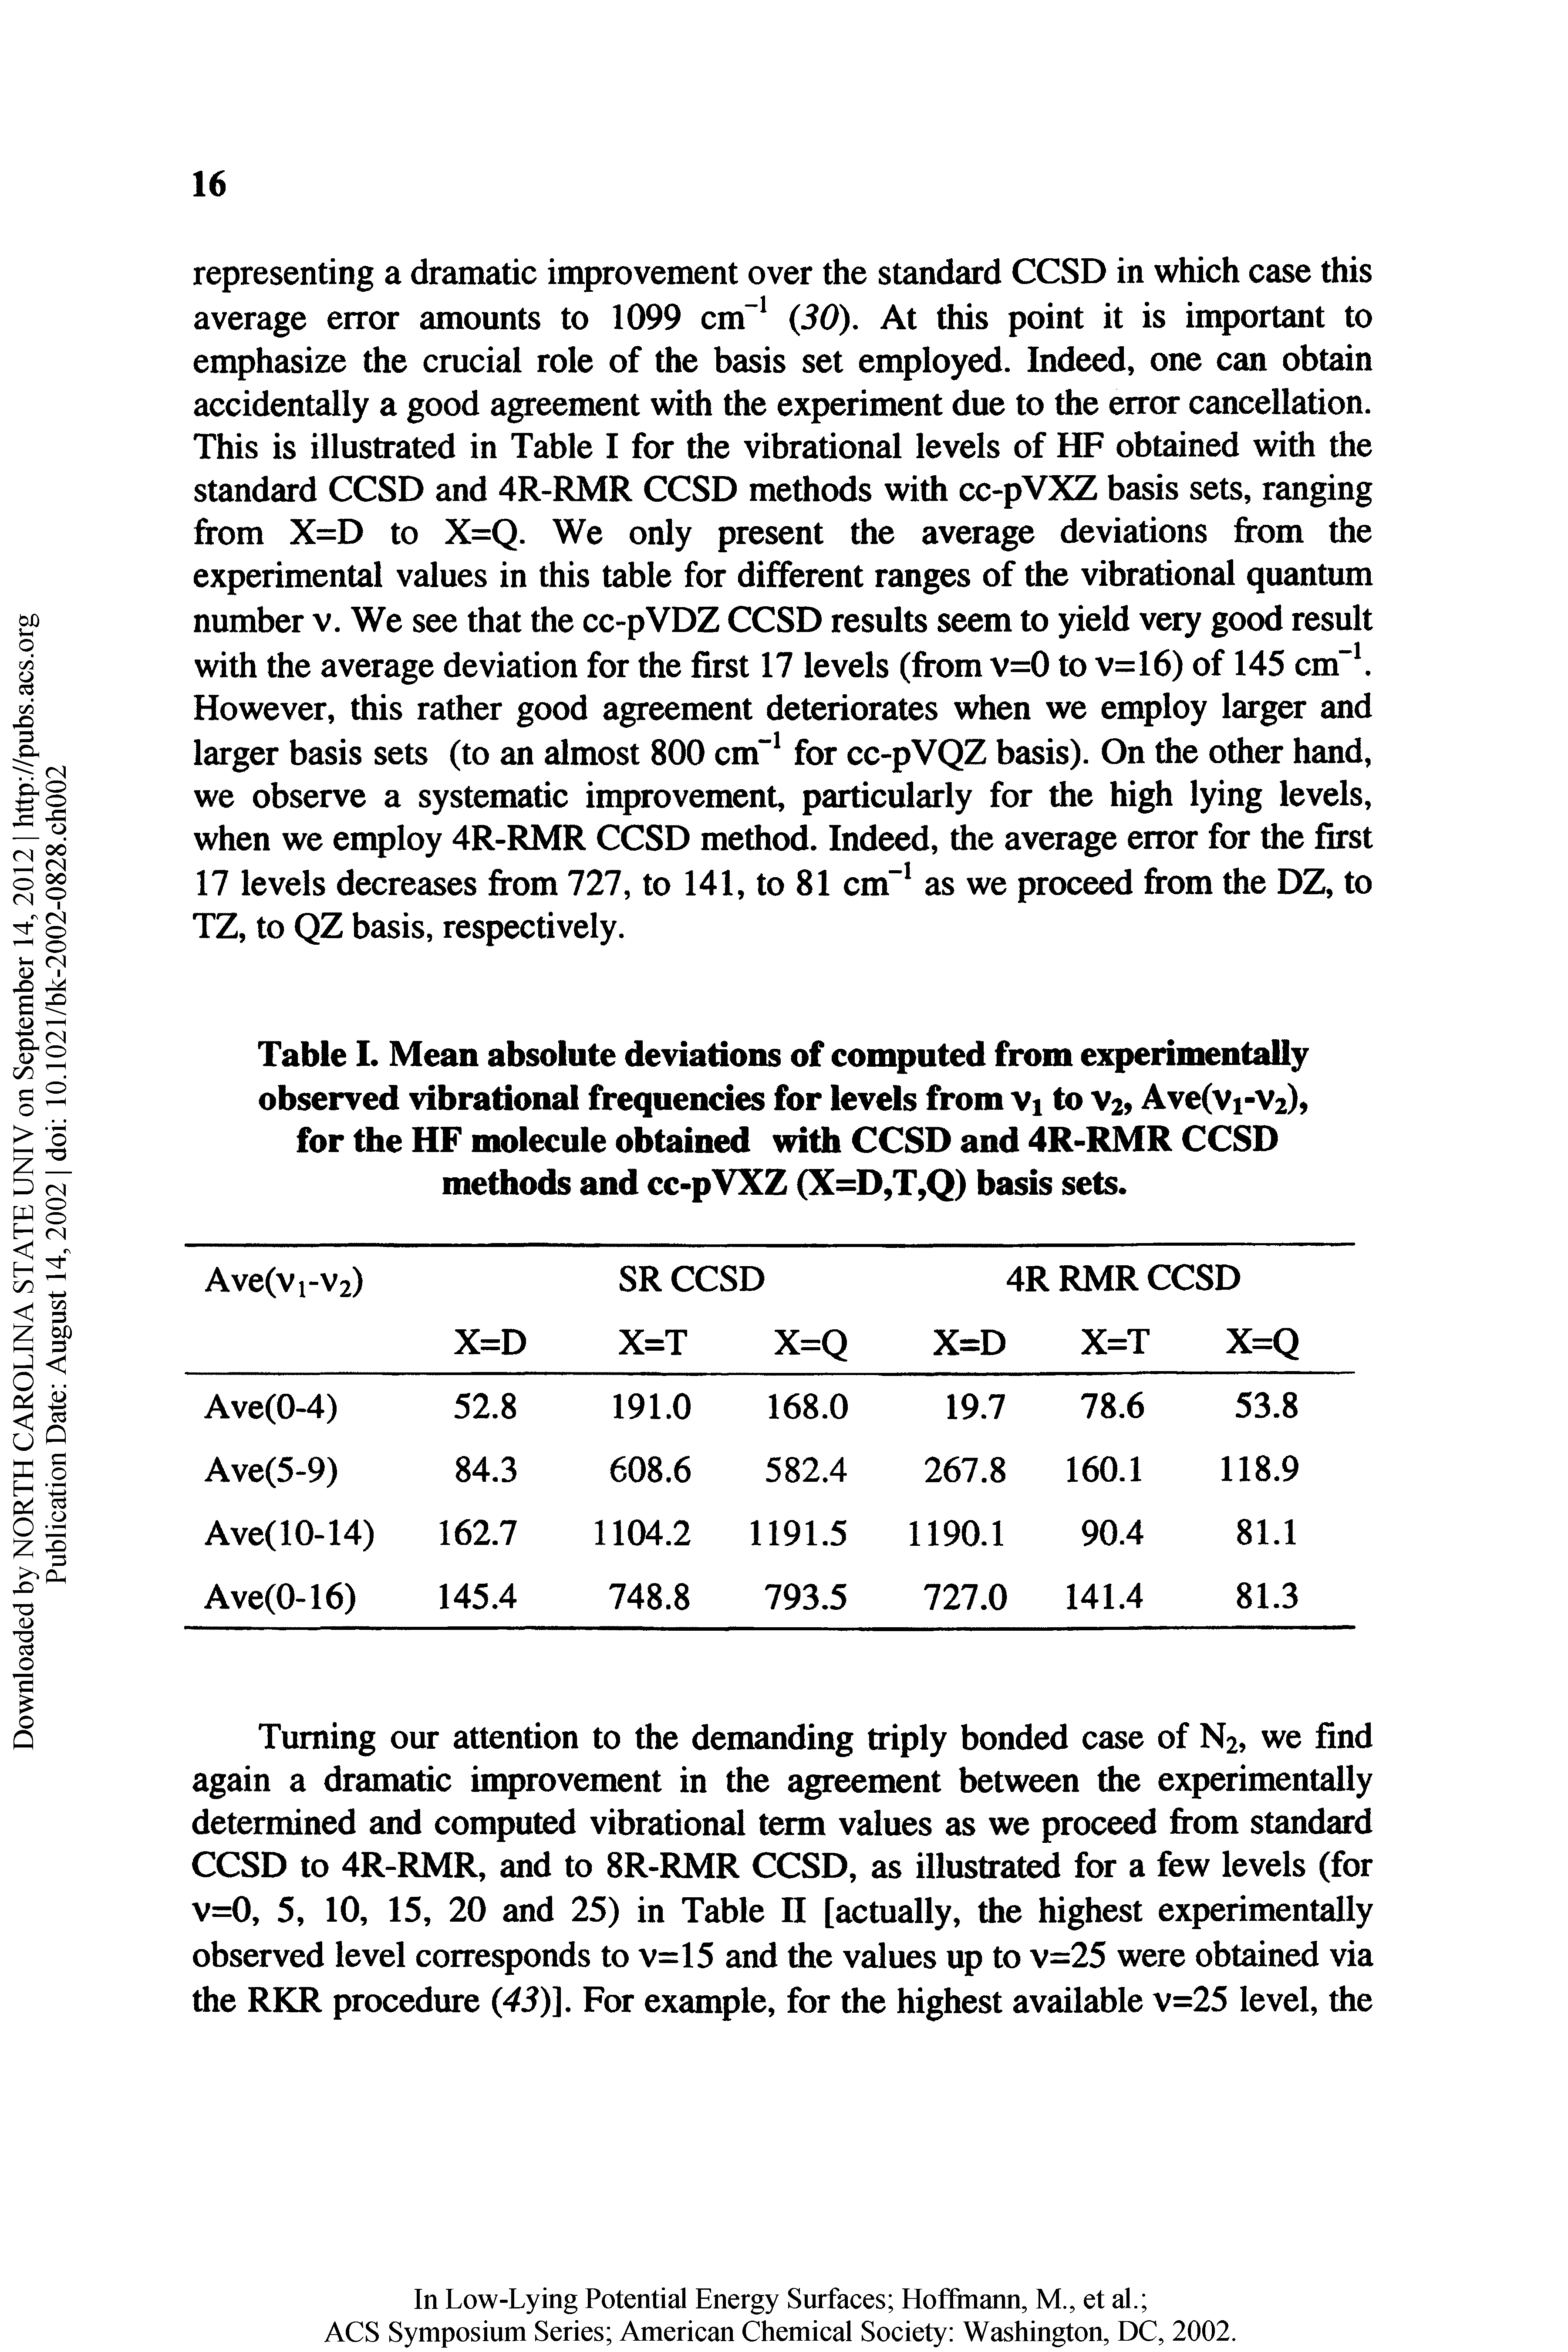 Table I. Mean absolute deviations of computed from experimentally observed vibrational frequencies for levels from Vi to Vi, Ave(Vi-V2), for the HF molecule obtained with CCSD and 4R-RMR CCSD methods and cc-pVXZ (X=D9T9Q) basis sets.